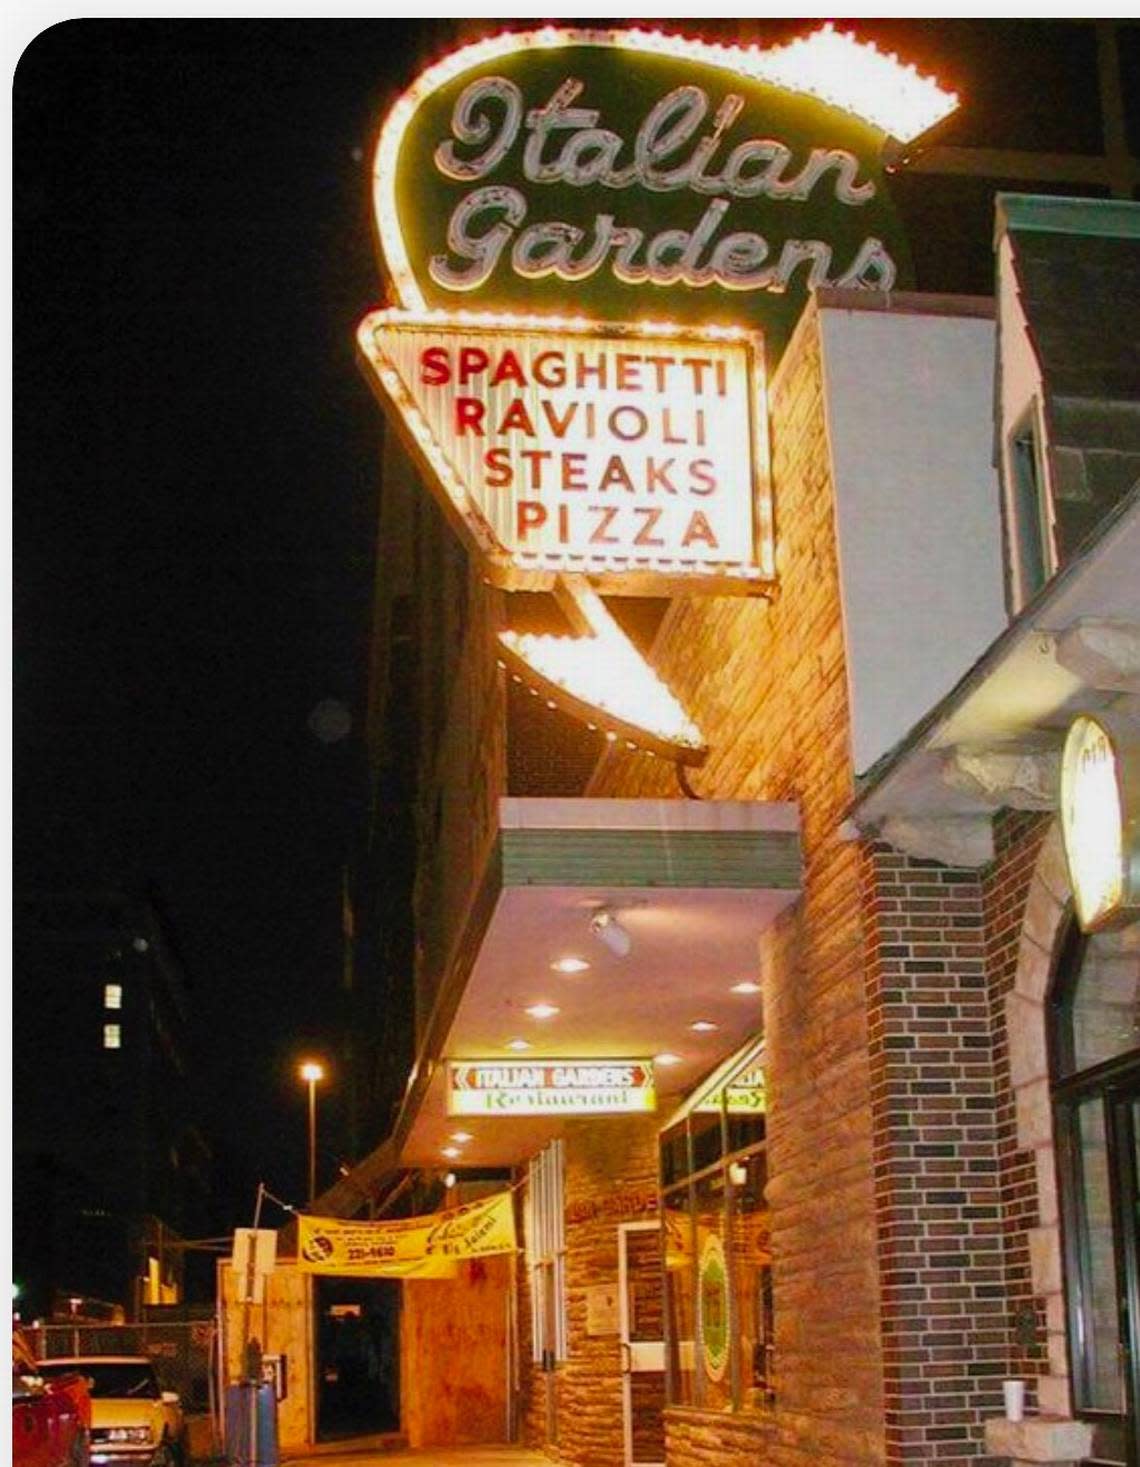 Italian Gardens’ neon sign at 1110 Baltimore Ave. (date unknown).